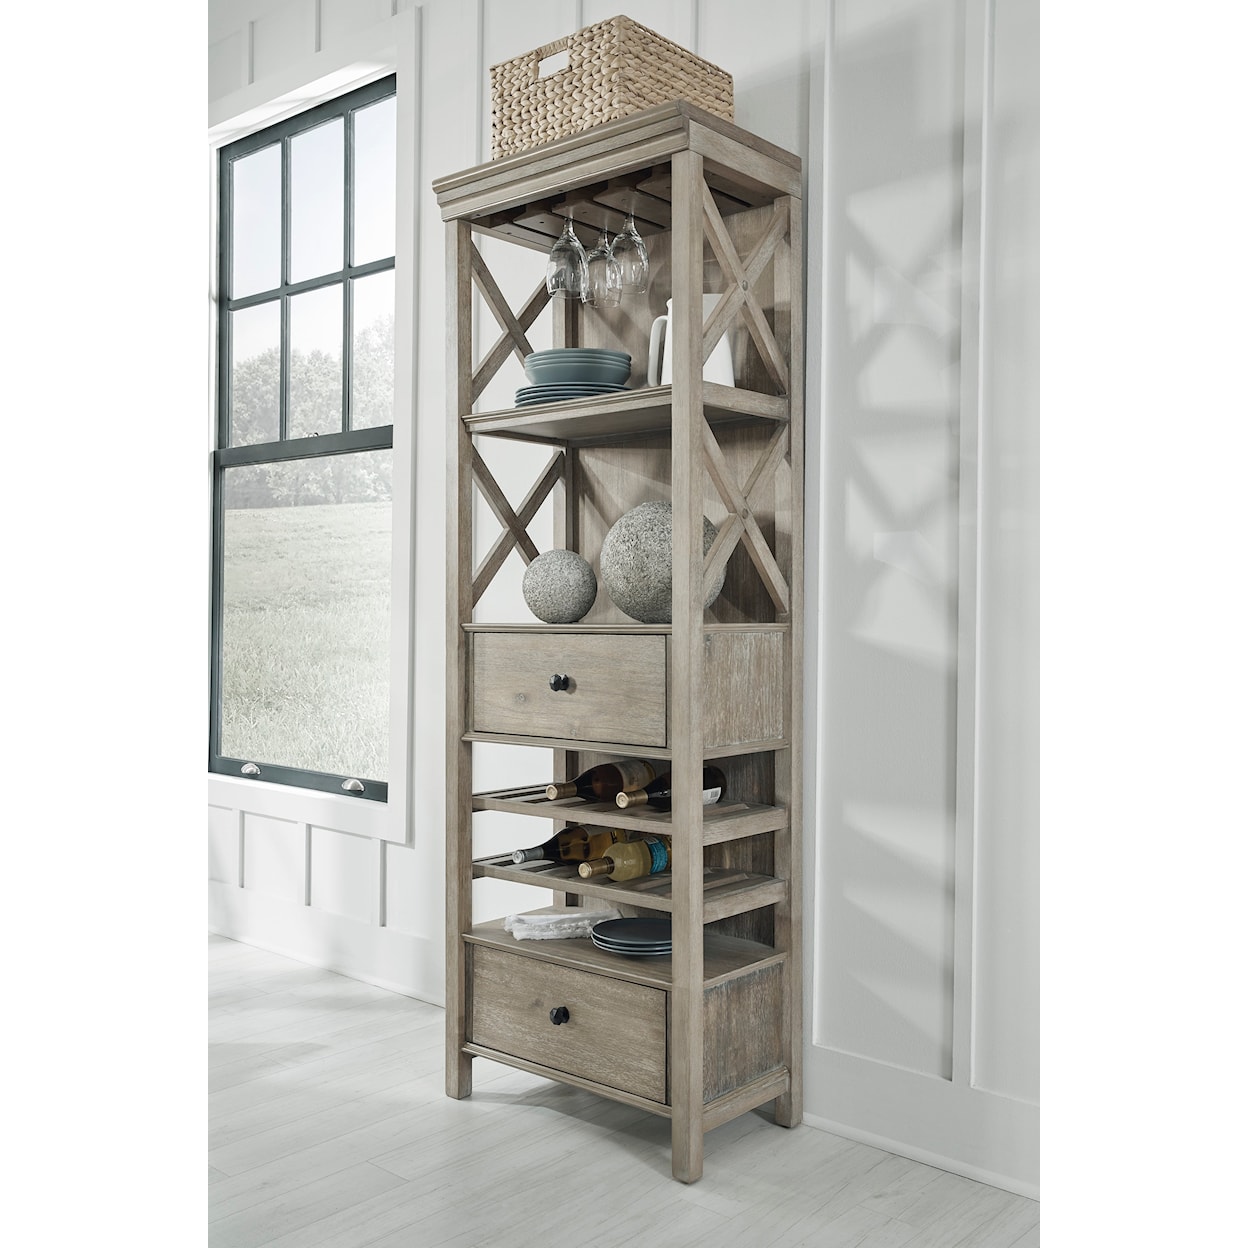 Signature Design by Ashley Moreshire Display Cabinet